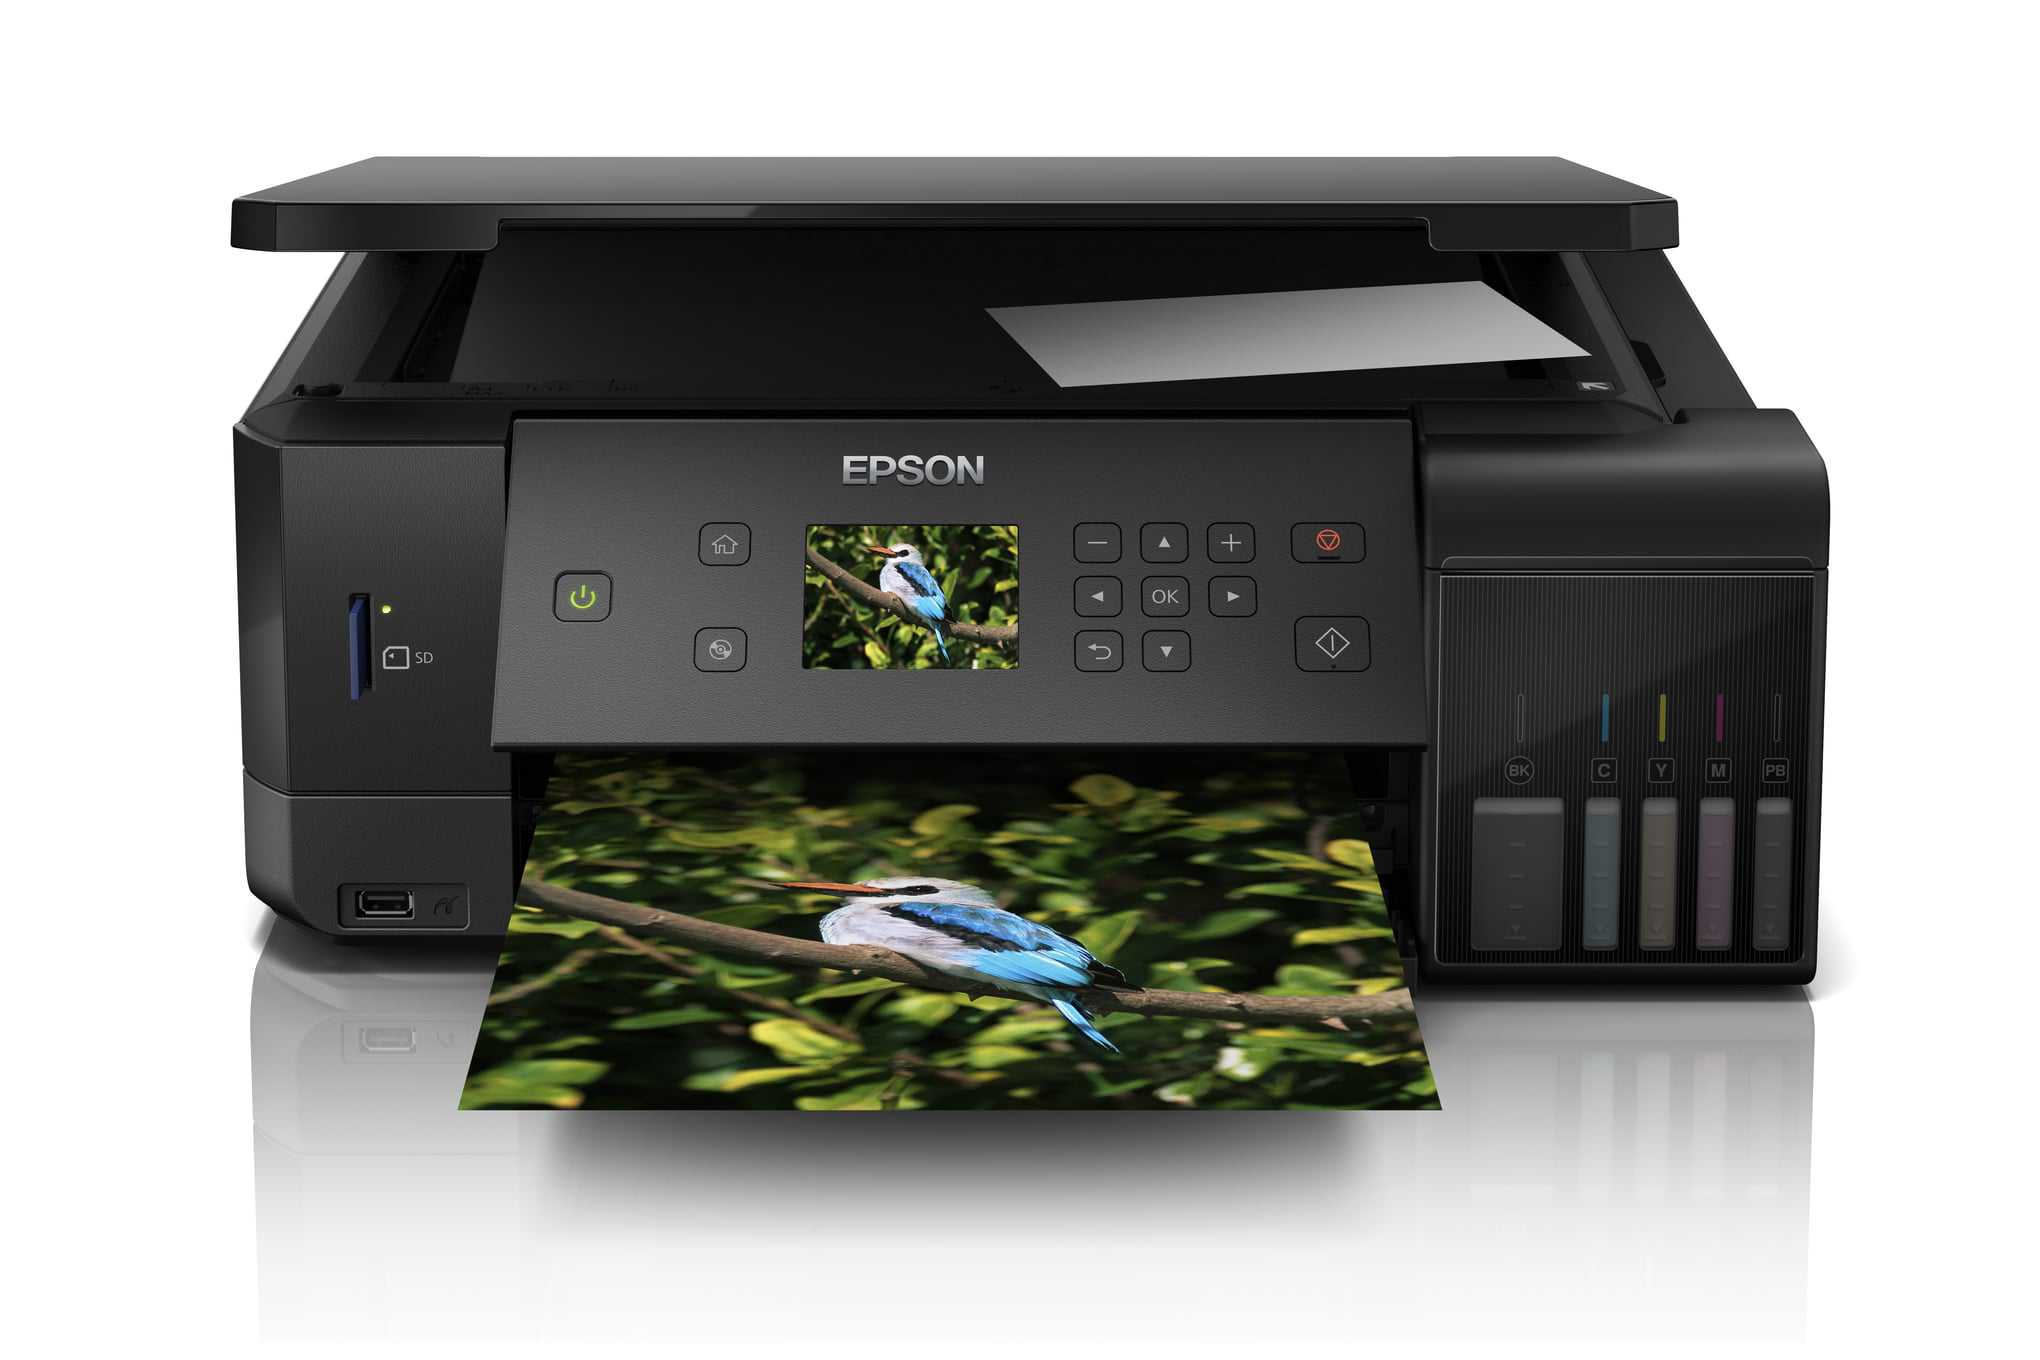 Epson’s new EcoTank photo printers bets on printing photos for less cost.